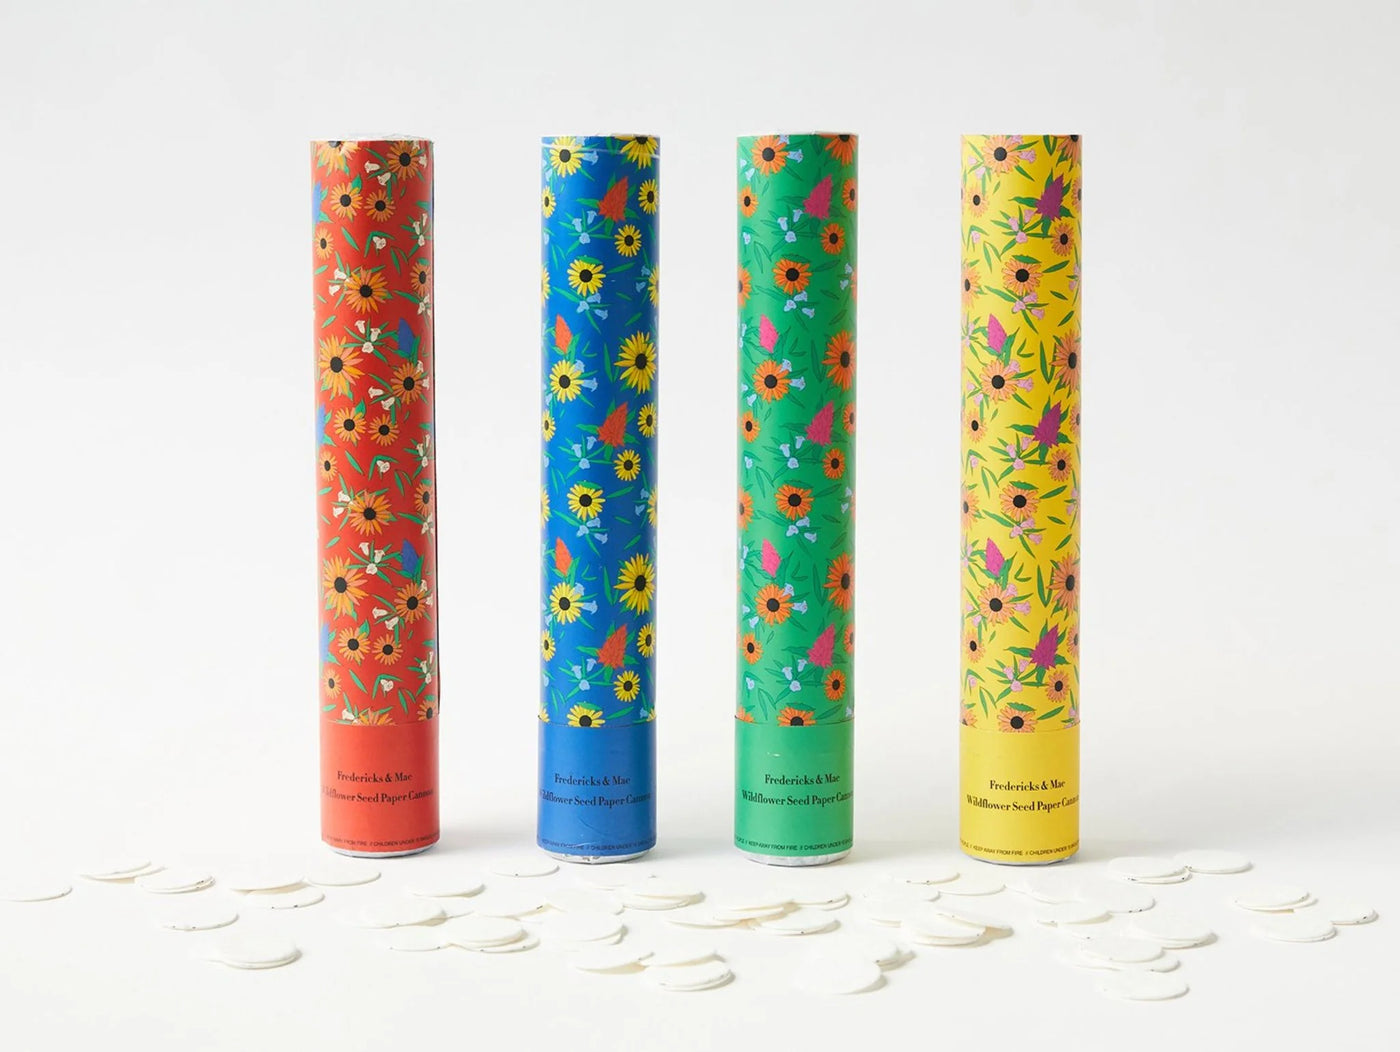 Yellow Wildflower Seed Paper Cannons